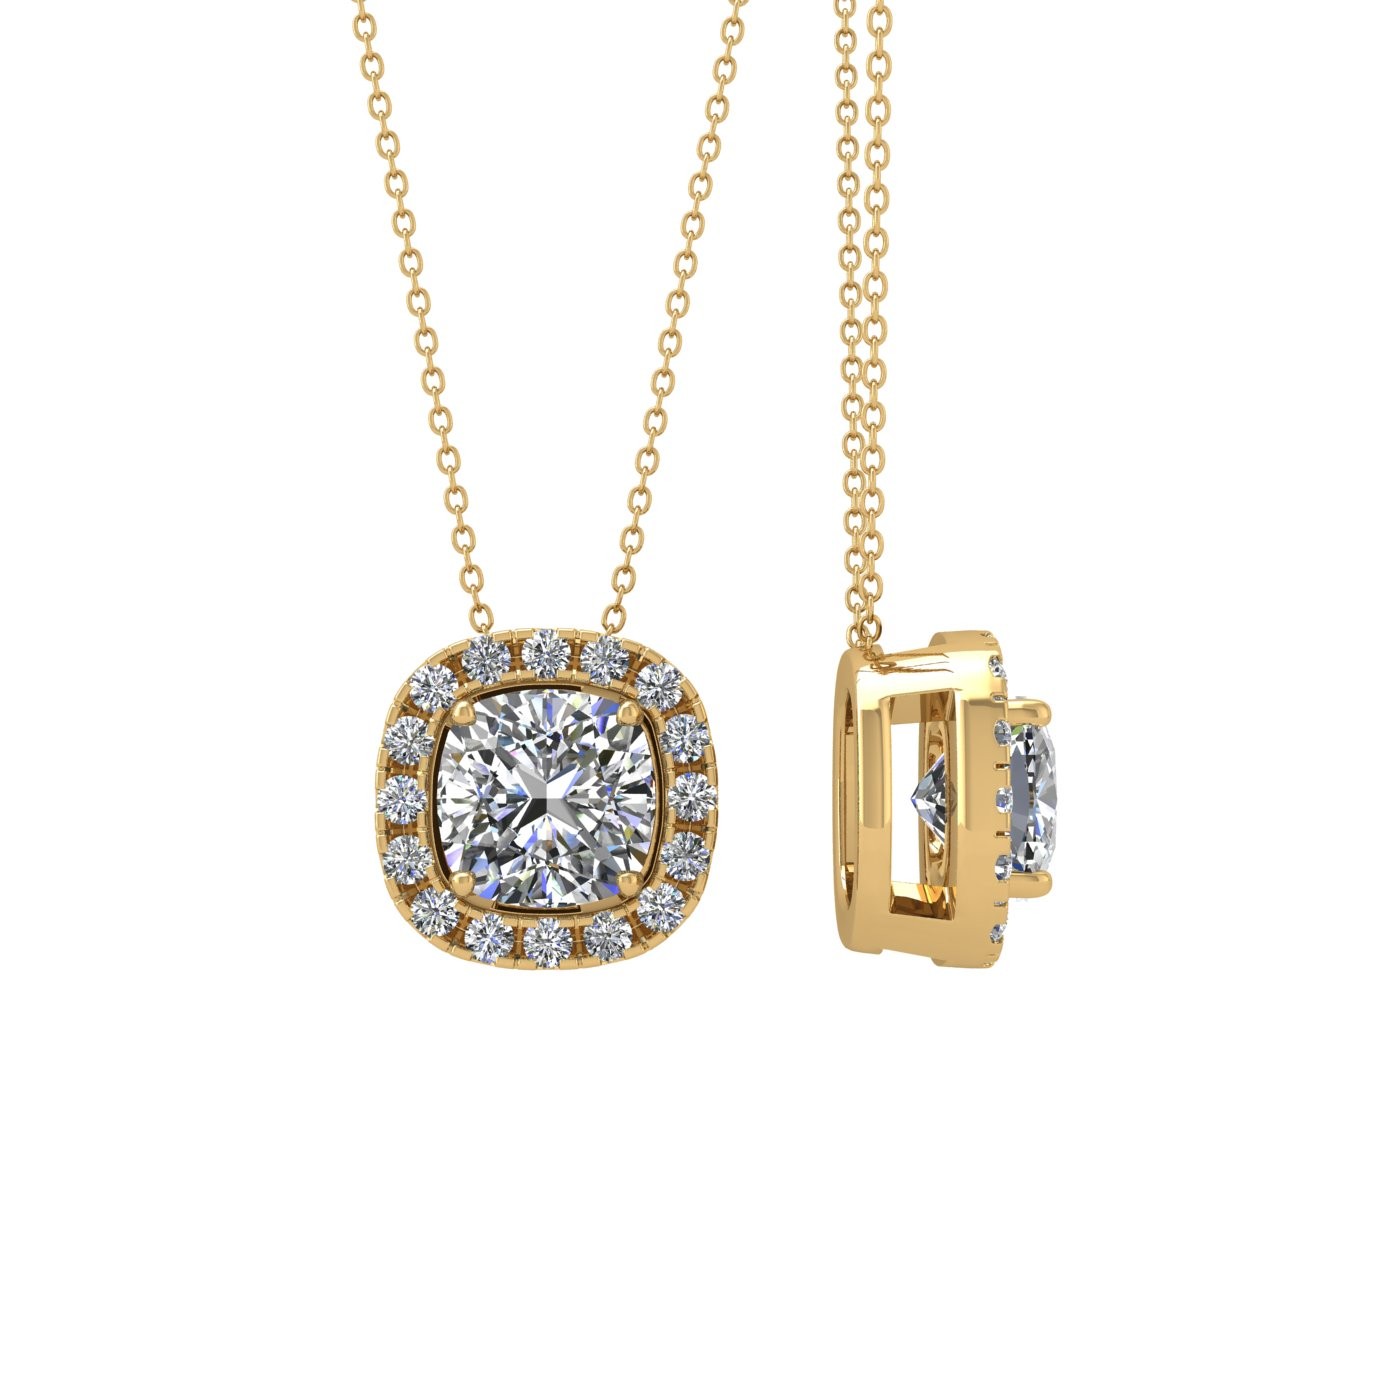 ROEN NYC - LYRA Round Brilliant Diamond Bezel Solitaire Necklace - 18K Gold  - Sustainably Lab Grown